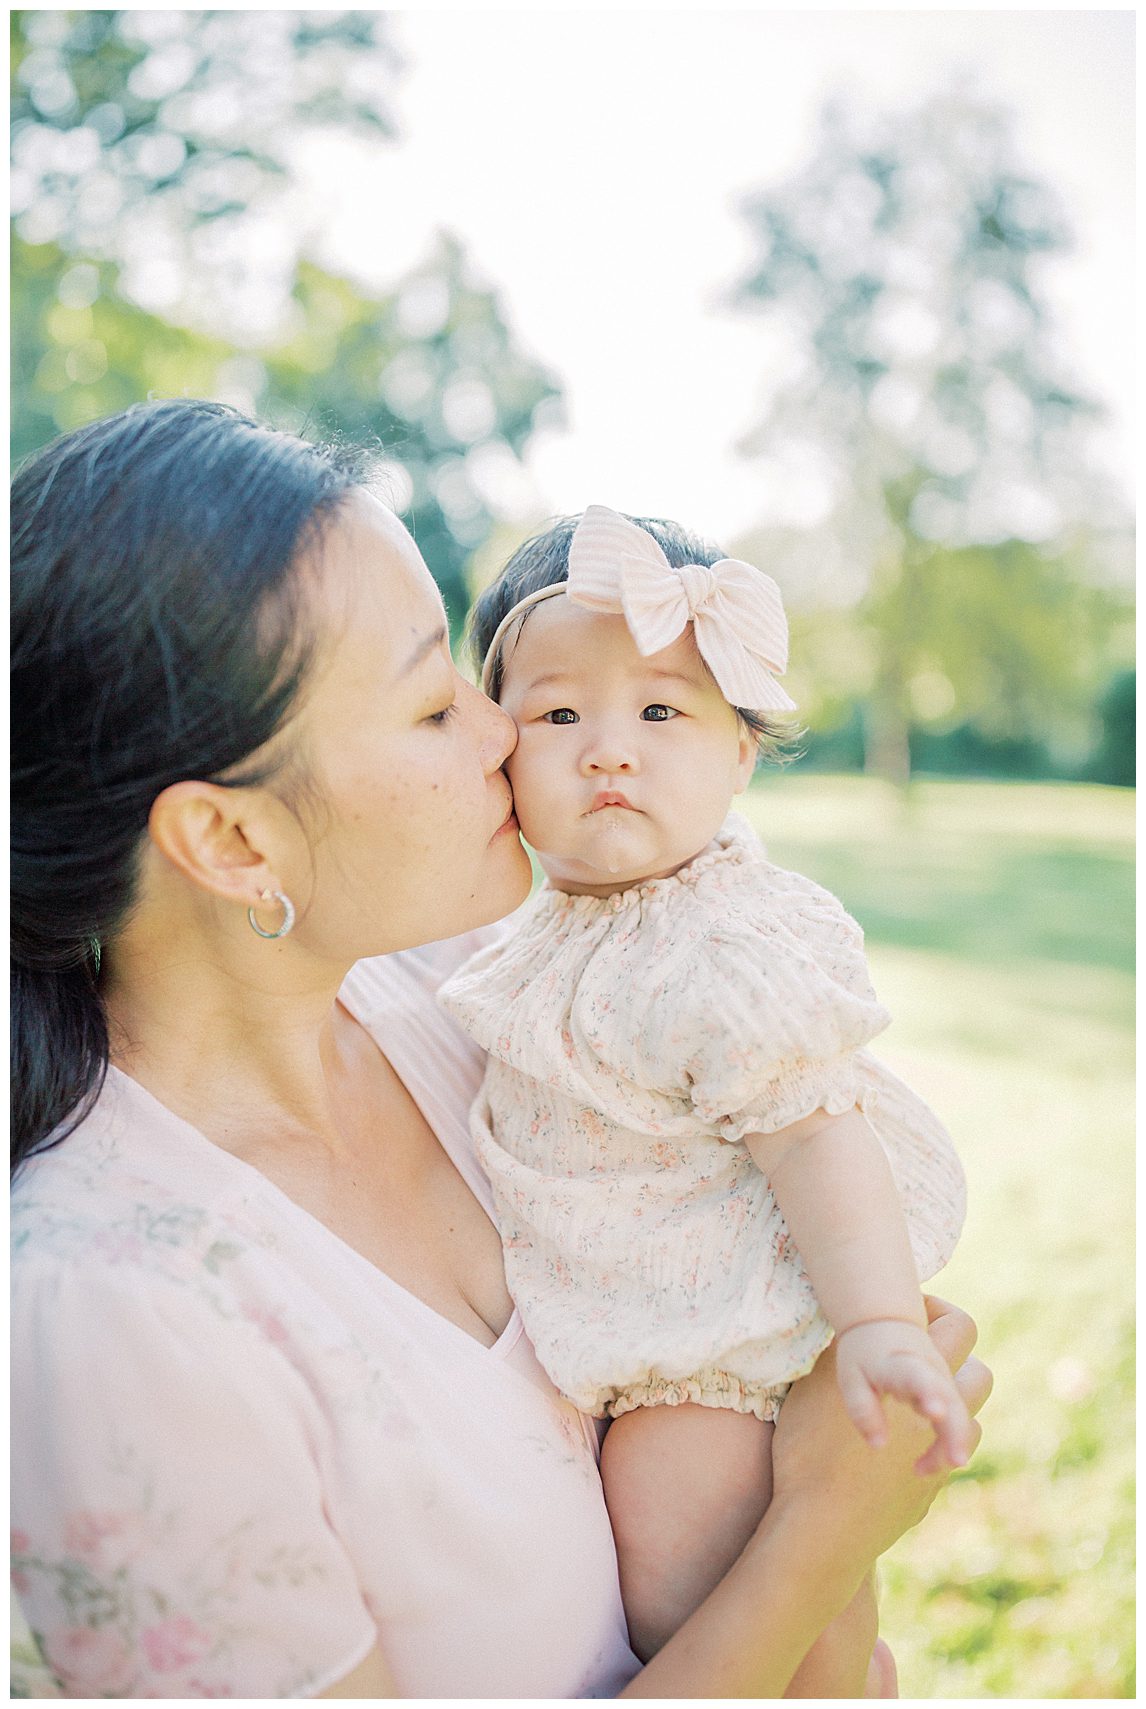 Mother kisses her infant daughter's cheek during her family photo session.